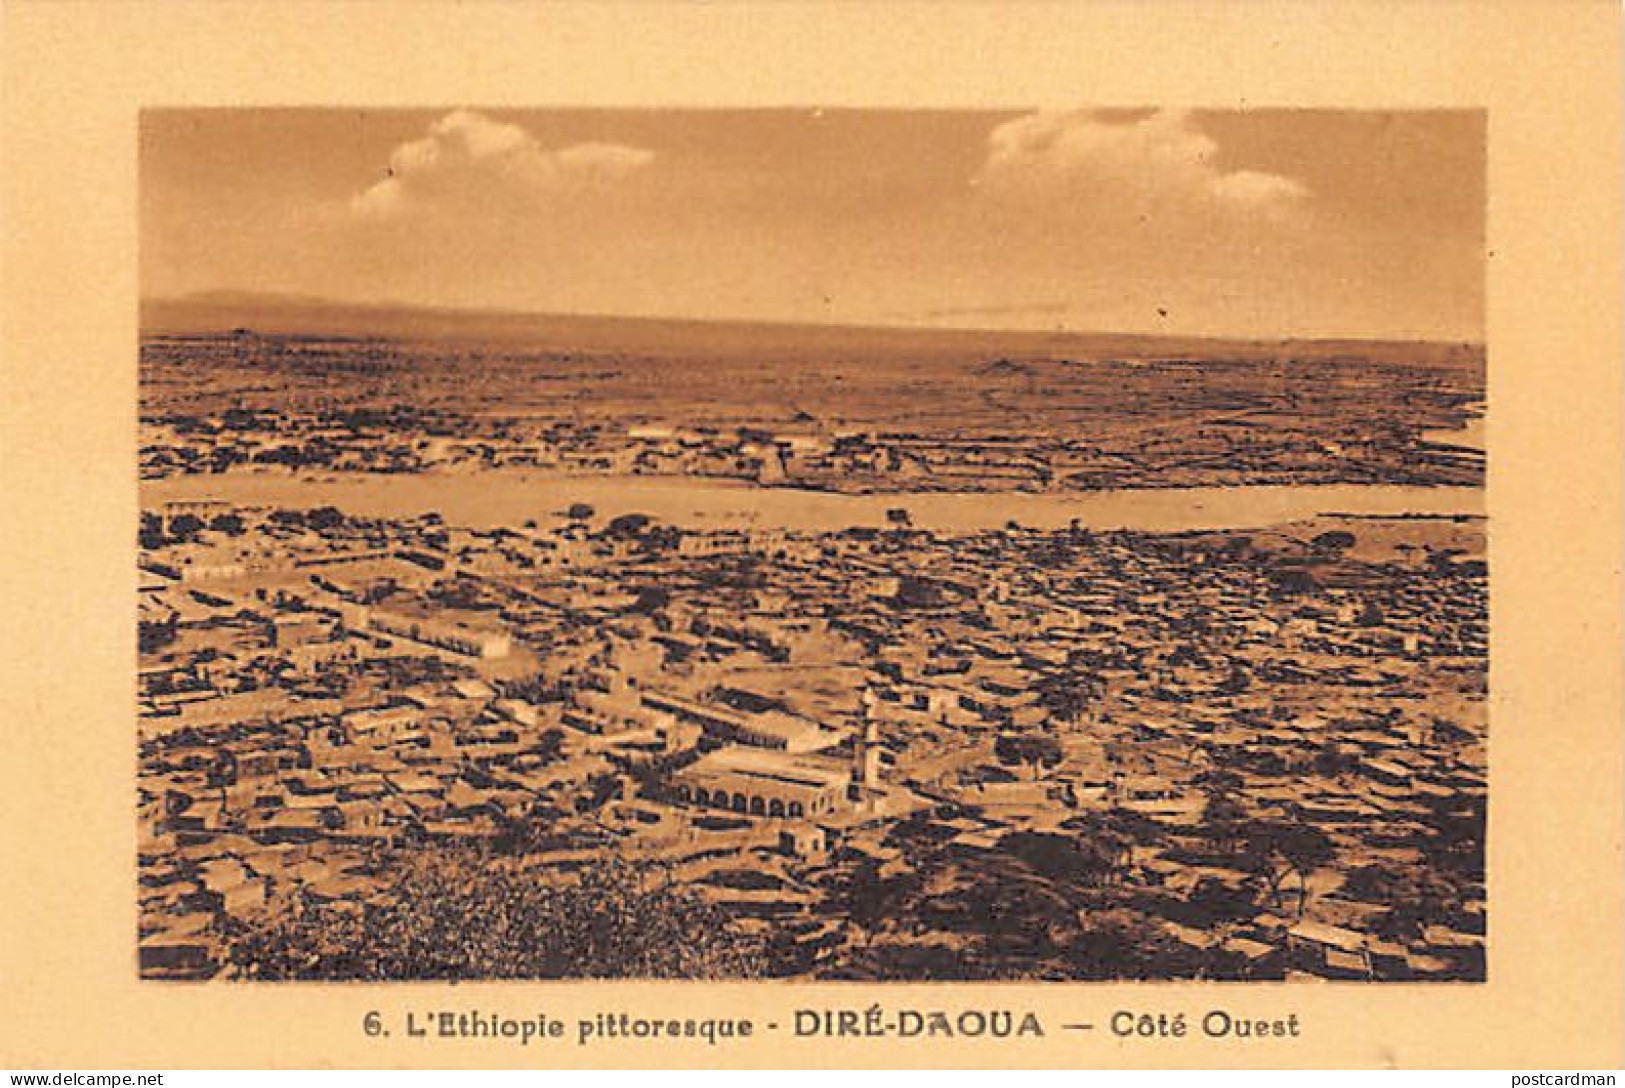 Ethiopia - DIRE DAWA - General View Of The West Side - Publ. Printing Works Of The Dire Dawa Catholic Mission - Photogra - Ethiopia